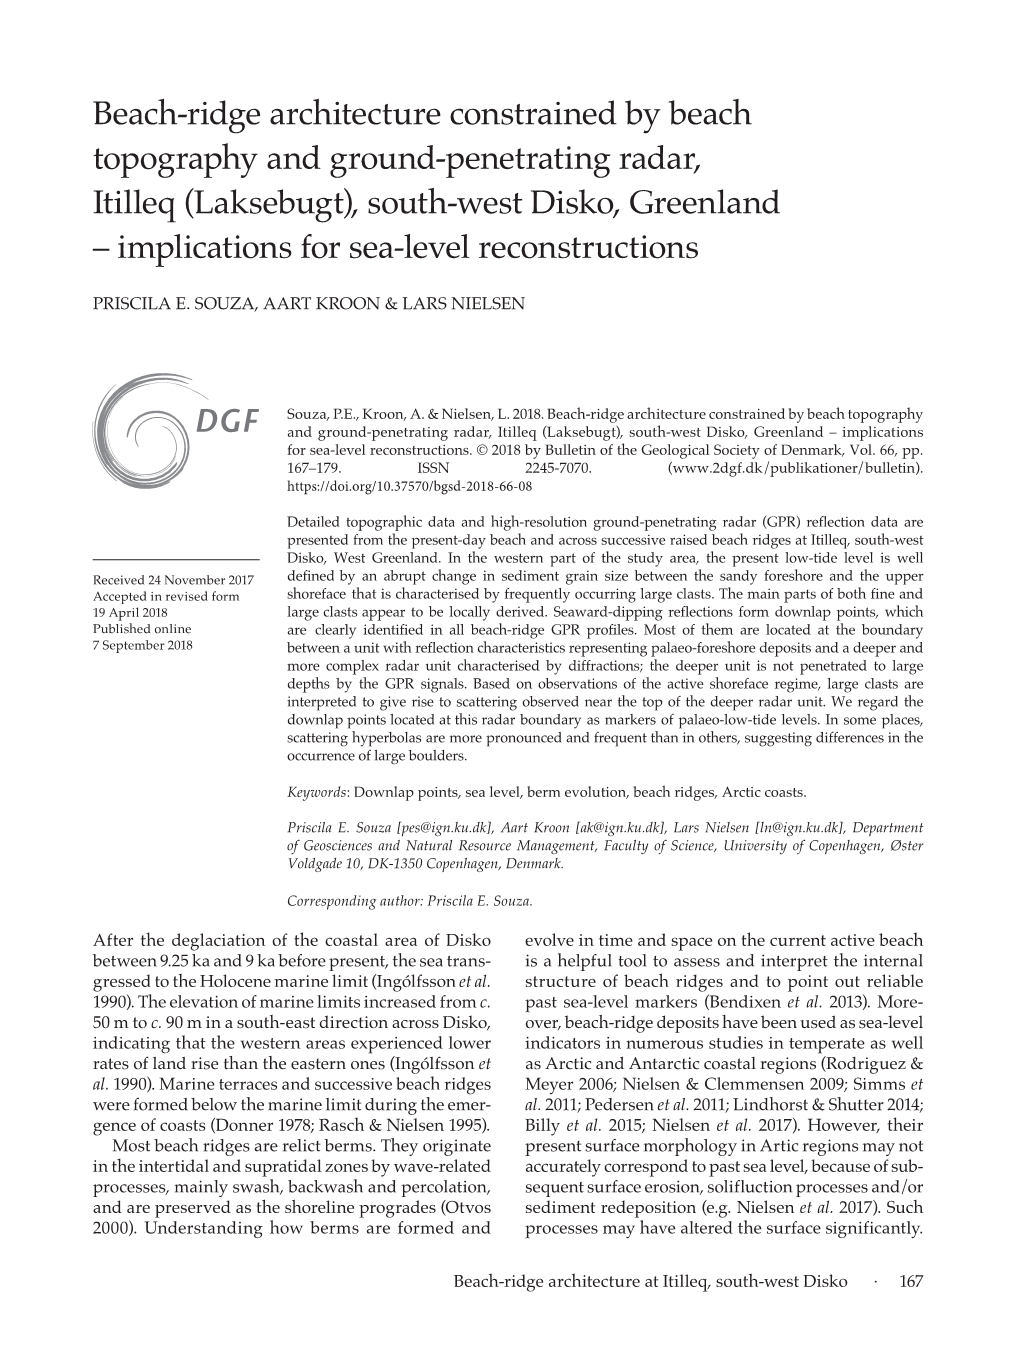 (Laksebugt), South-West Disko, Greenland – Implications for Sea-Level Reconstructions